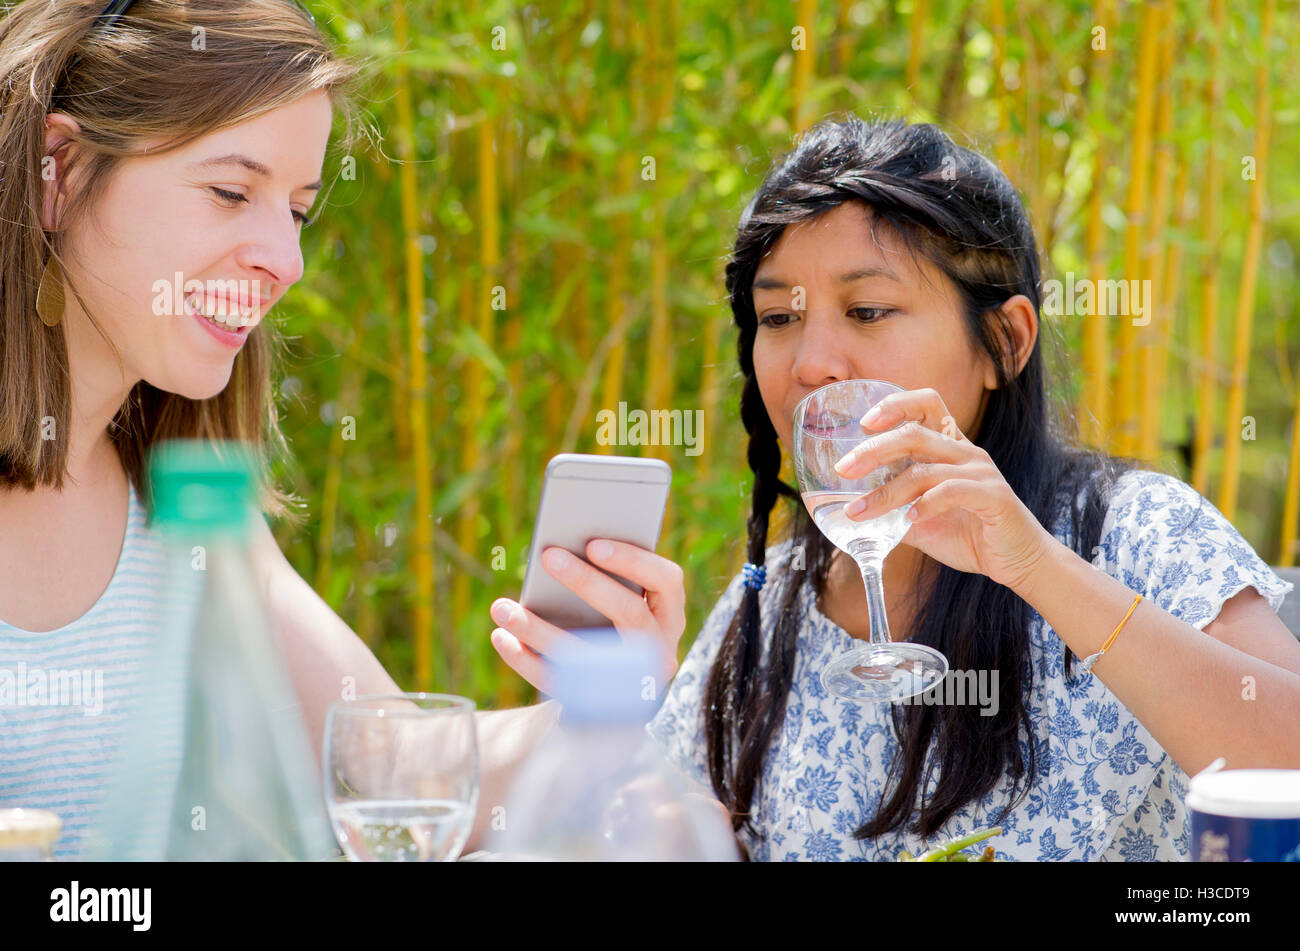 Women relaxing together outdoors, looking at smartphone Stock Photo